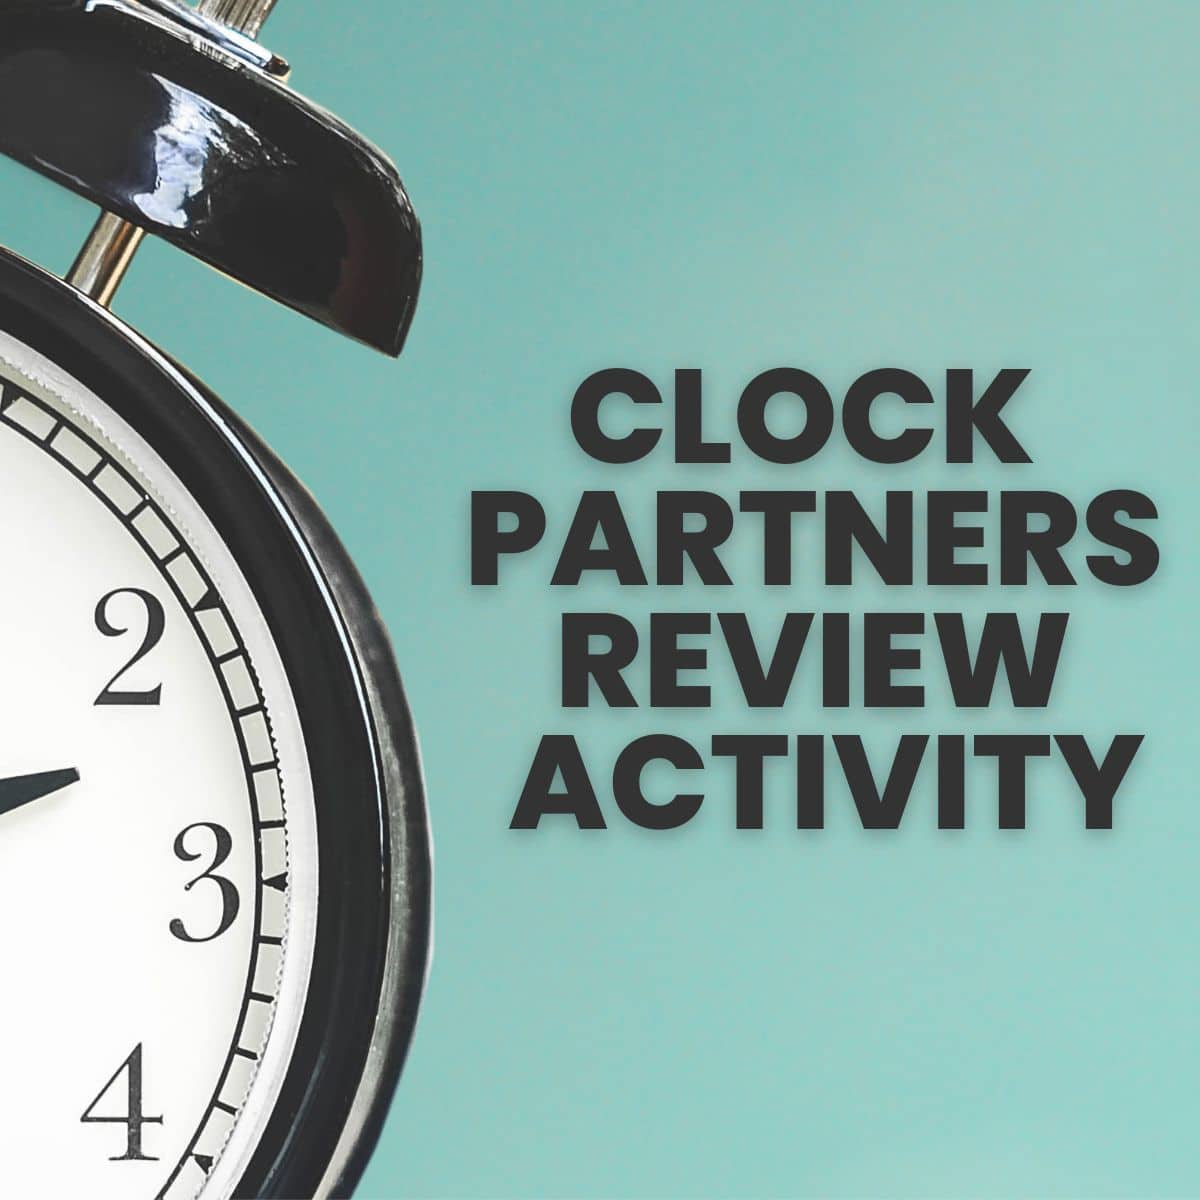 corner of alarm clock with text "clock partners review activity" 